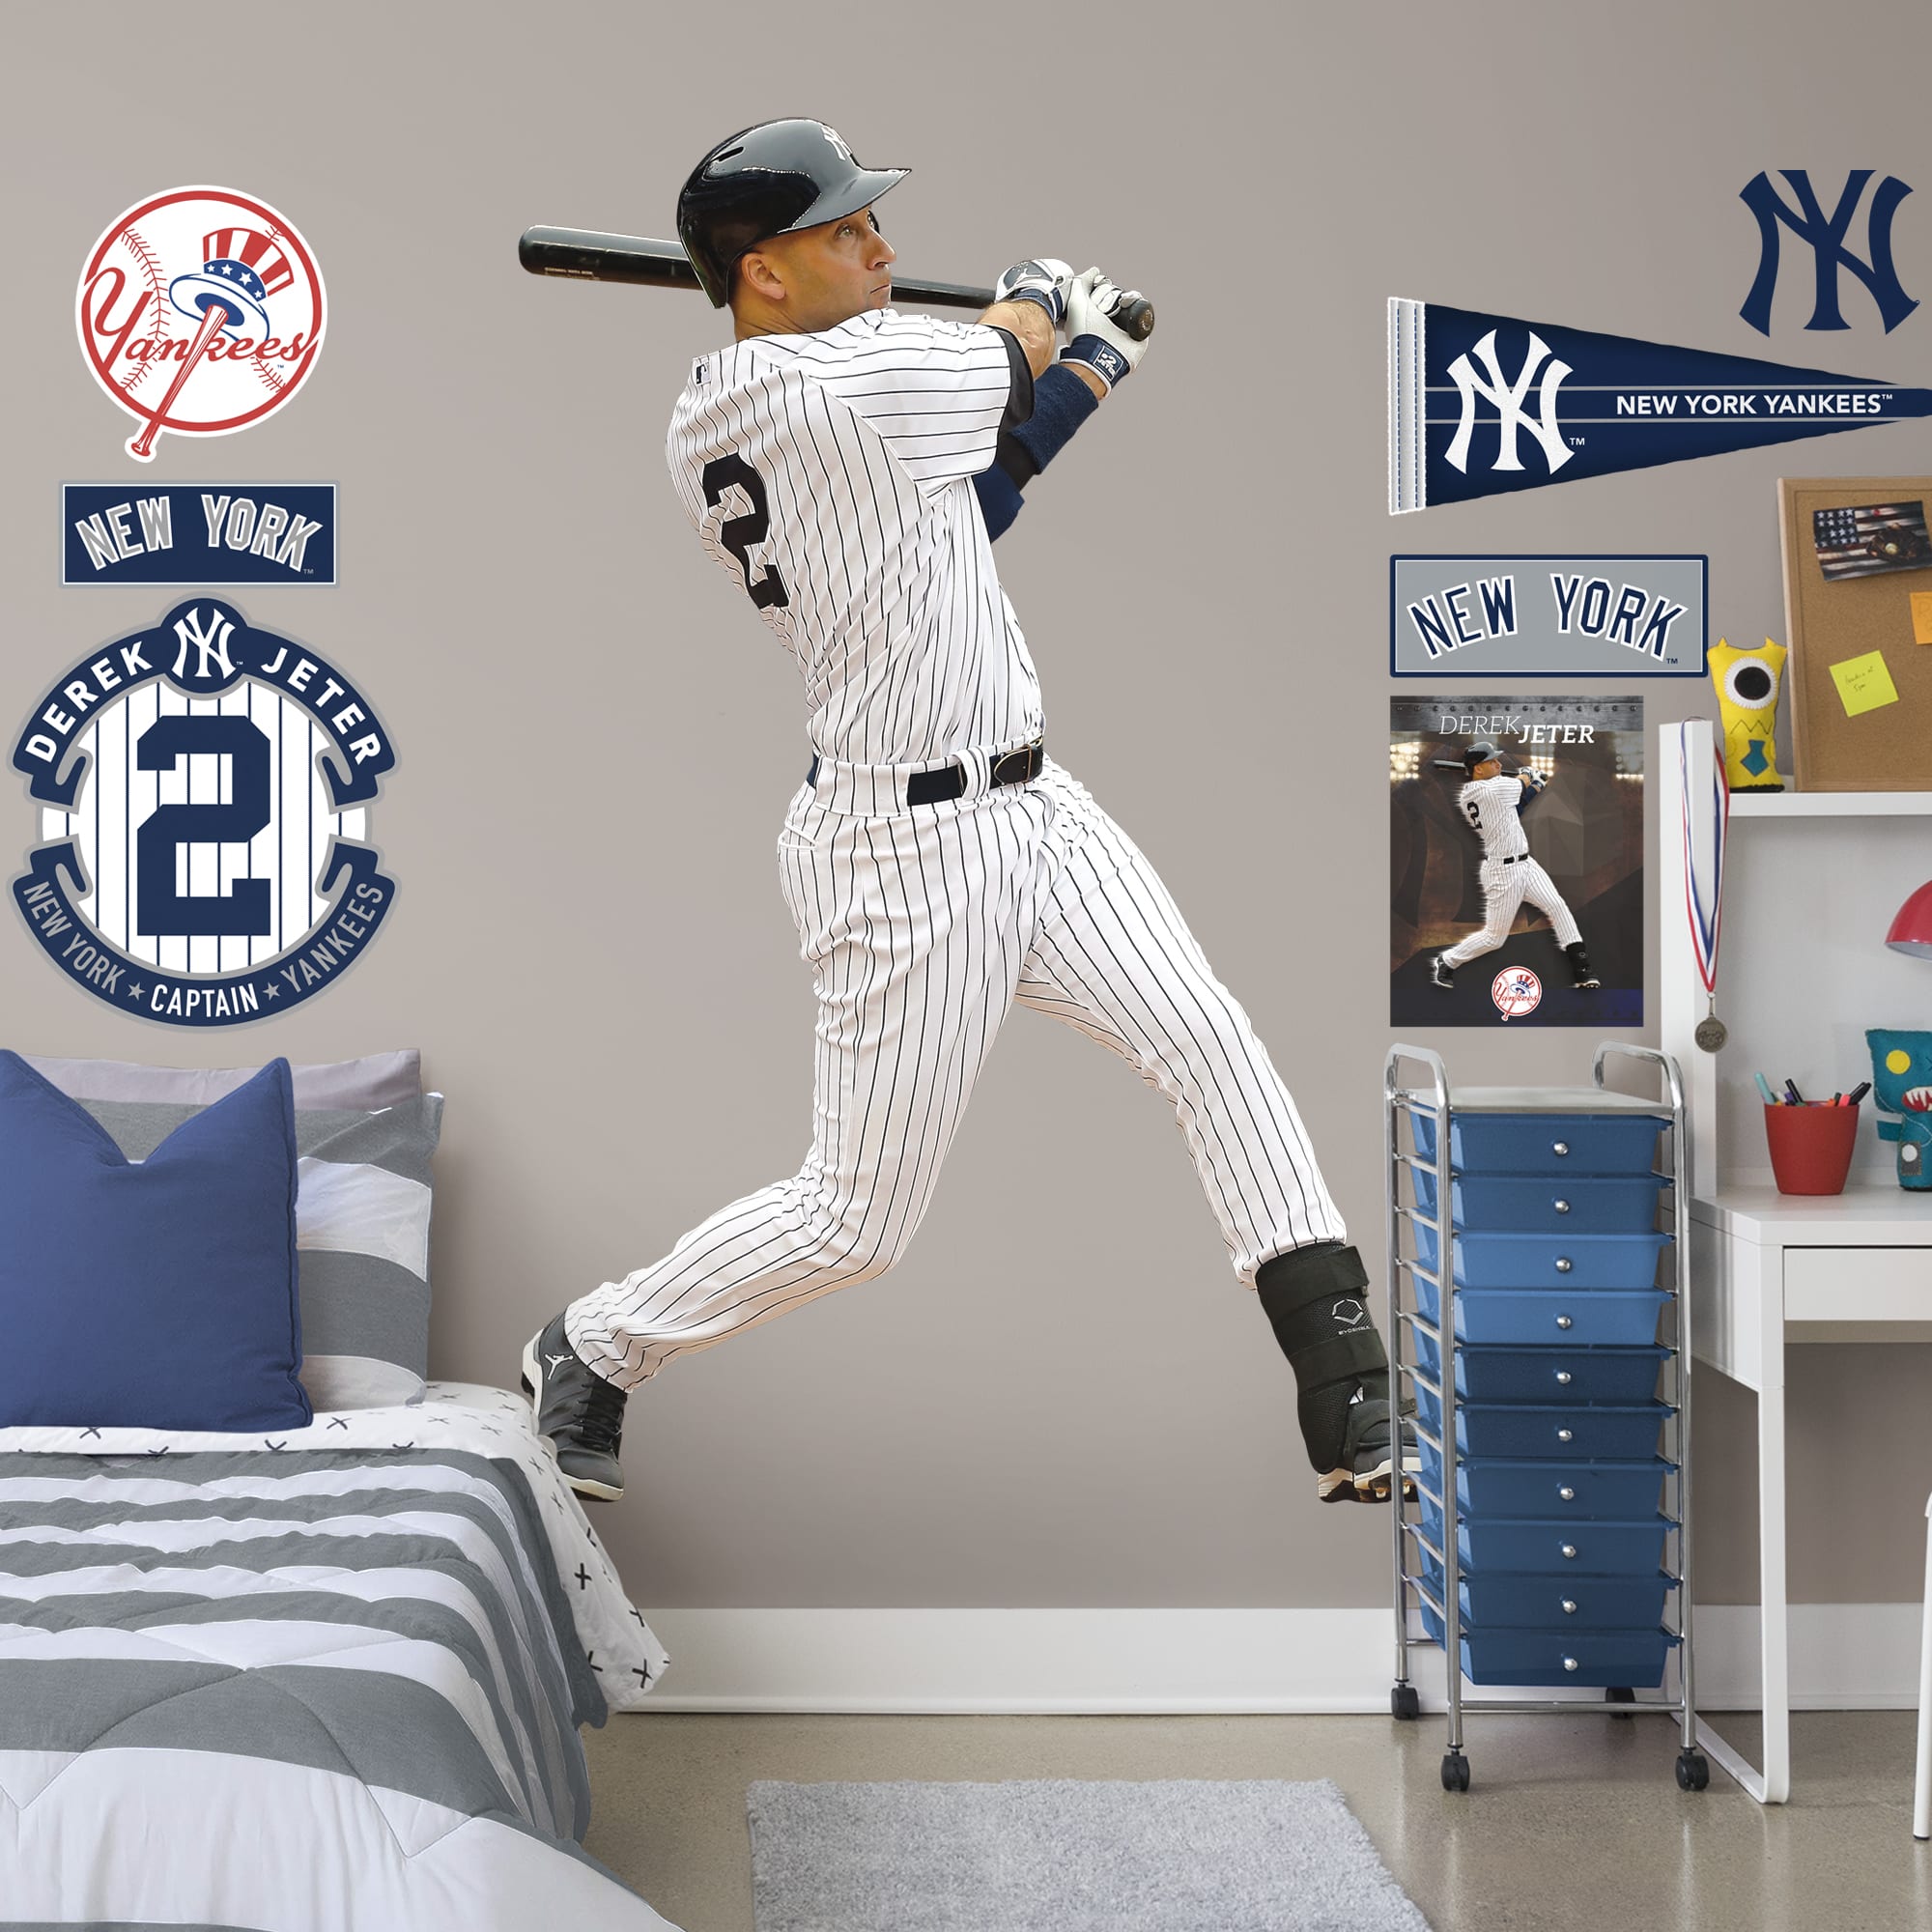 Derek Jeter for New York Yankees: Legacy - Officially Licensed MLB Removable Wall Decal Life-Size Athlete + 11 Decals (50"W x 74